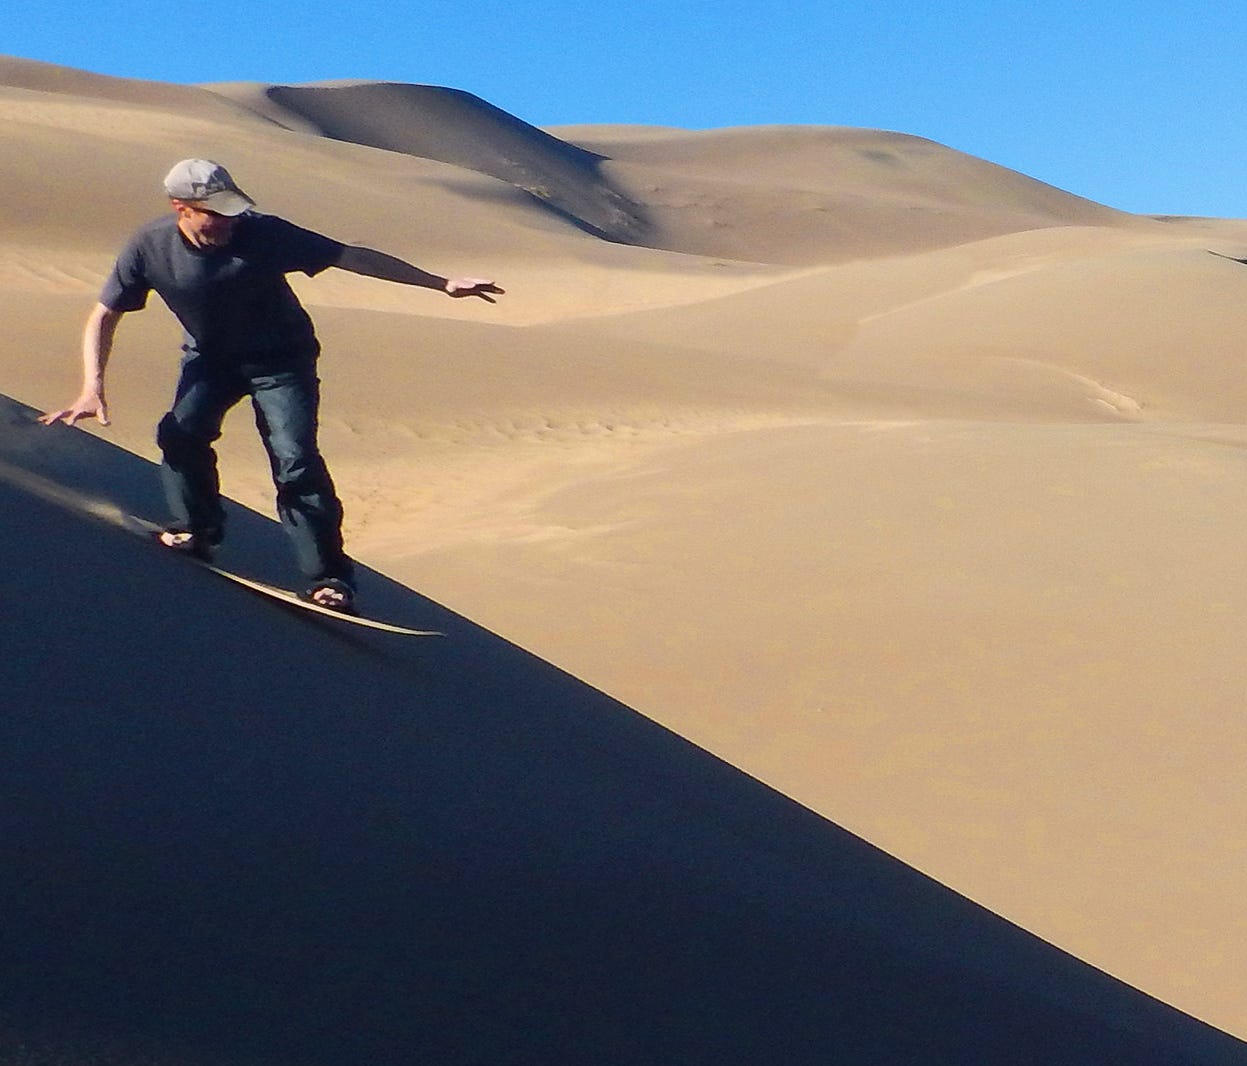 Visitors to the park are invited to actually surf the sand dunes. Choose from either sand sledding or sandboarding (think snowboarding, on sand), steady your balance and glide down the sand dunes.